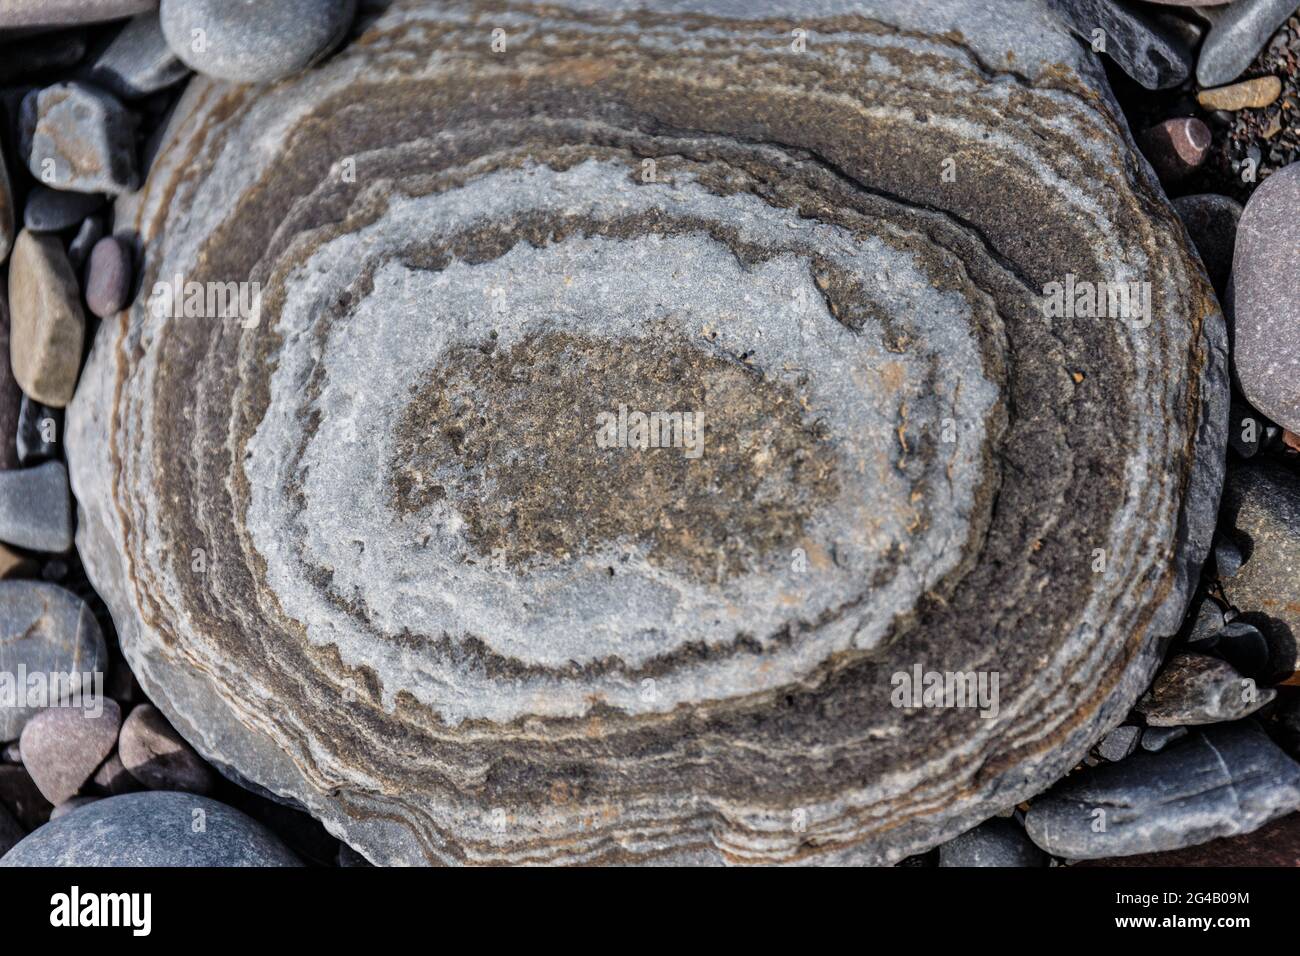 Round grey stone with a concentric circles pattern, view from above, Cornwall, England, UK Stock Photo